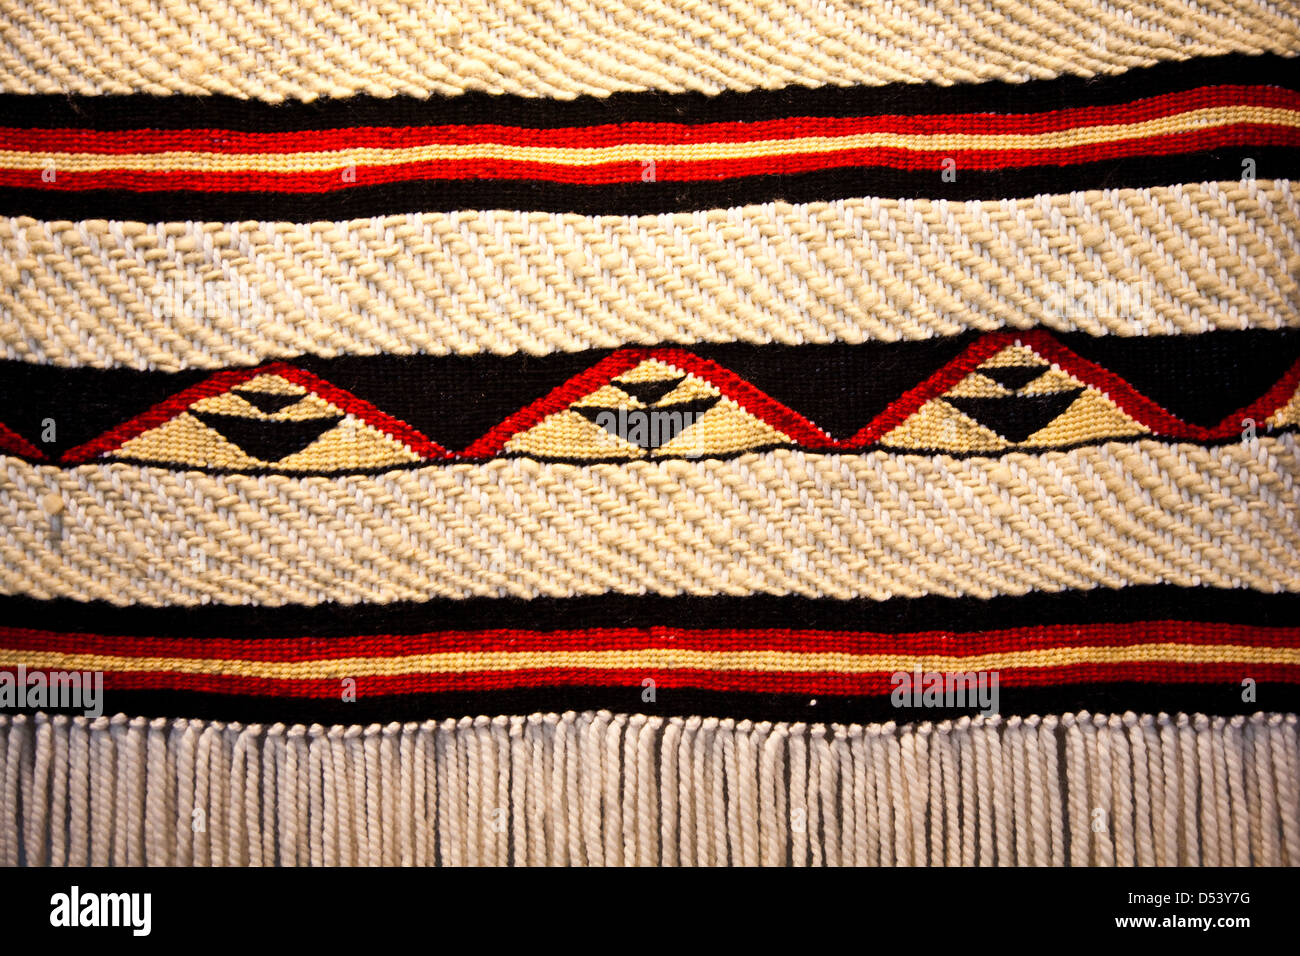 Abstract image of a woven native blanket of the Squamish First Nation, Canada Stock Photo